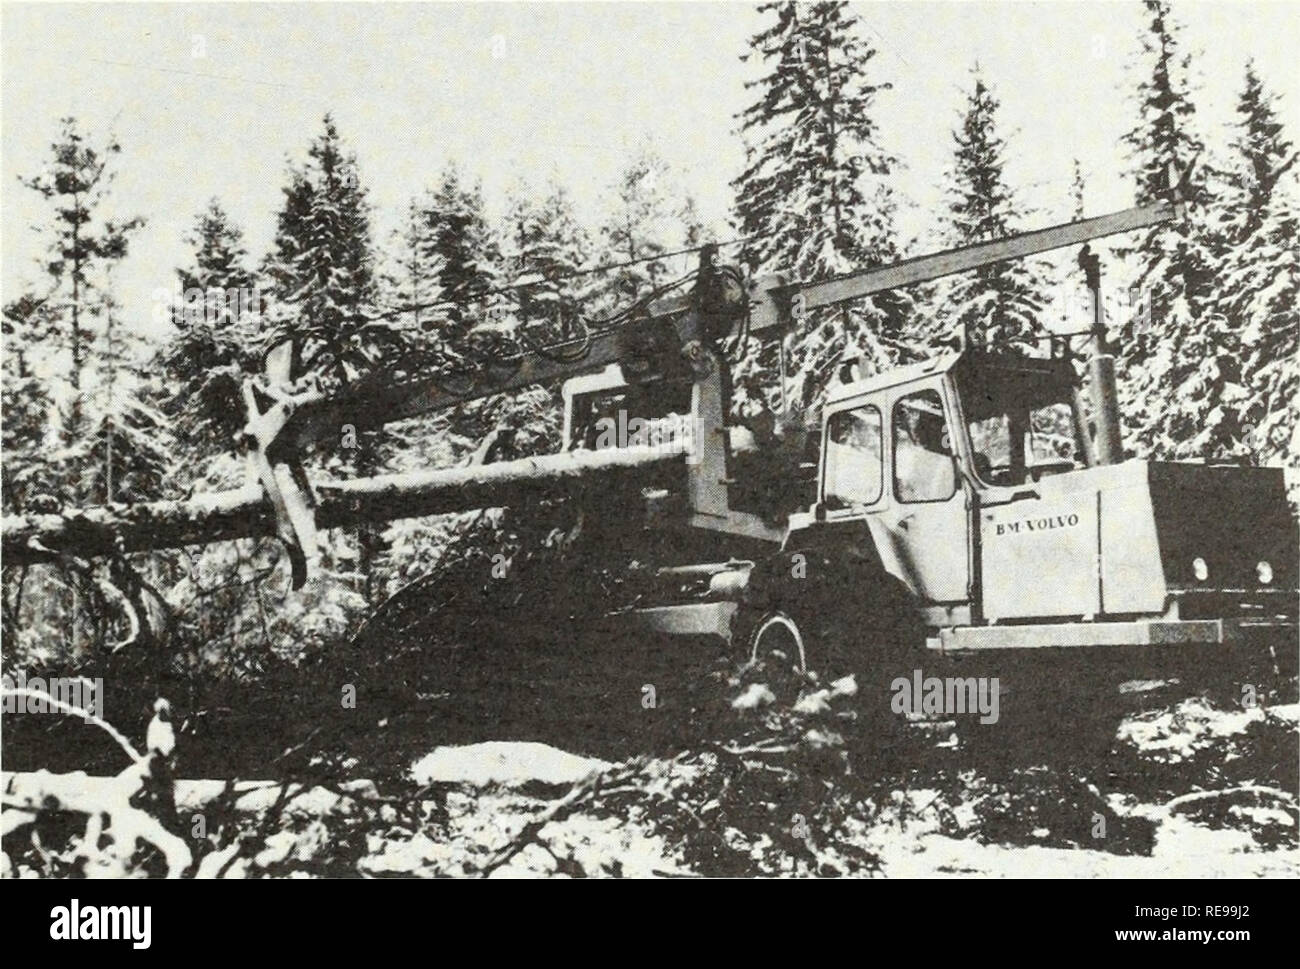 . Converting forest residue to structural flakeboard : the fingerling concept. Particle board; Wood waste Recycling. Figure 13.—Drott Feller-Bunaher, Model 40 LC. The tree is severed at the base by the shear3 and controlled for bunching by the locking arm.. Figure 14.—BM Volvo SM-880 Processor. The felled tree is grappled and returned to the holding arm. On the return travel of the boom for the next tree, the tree in the holding arm is prelimbed by the knives on the edge of the grapple arms; the tree is then automatically transferred to the limber feed rolls and pulled through two wraparound,  Stock Photo